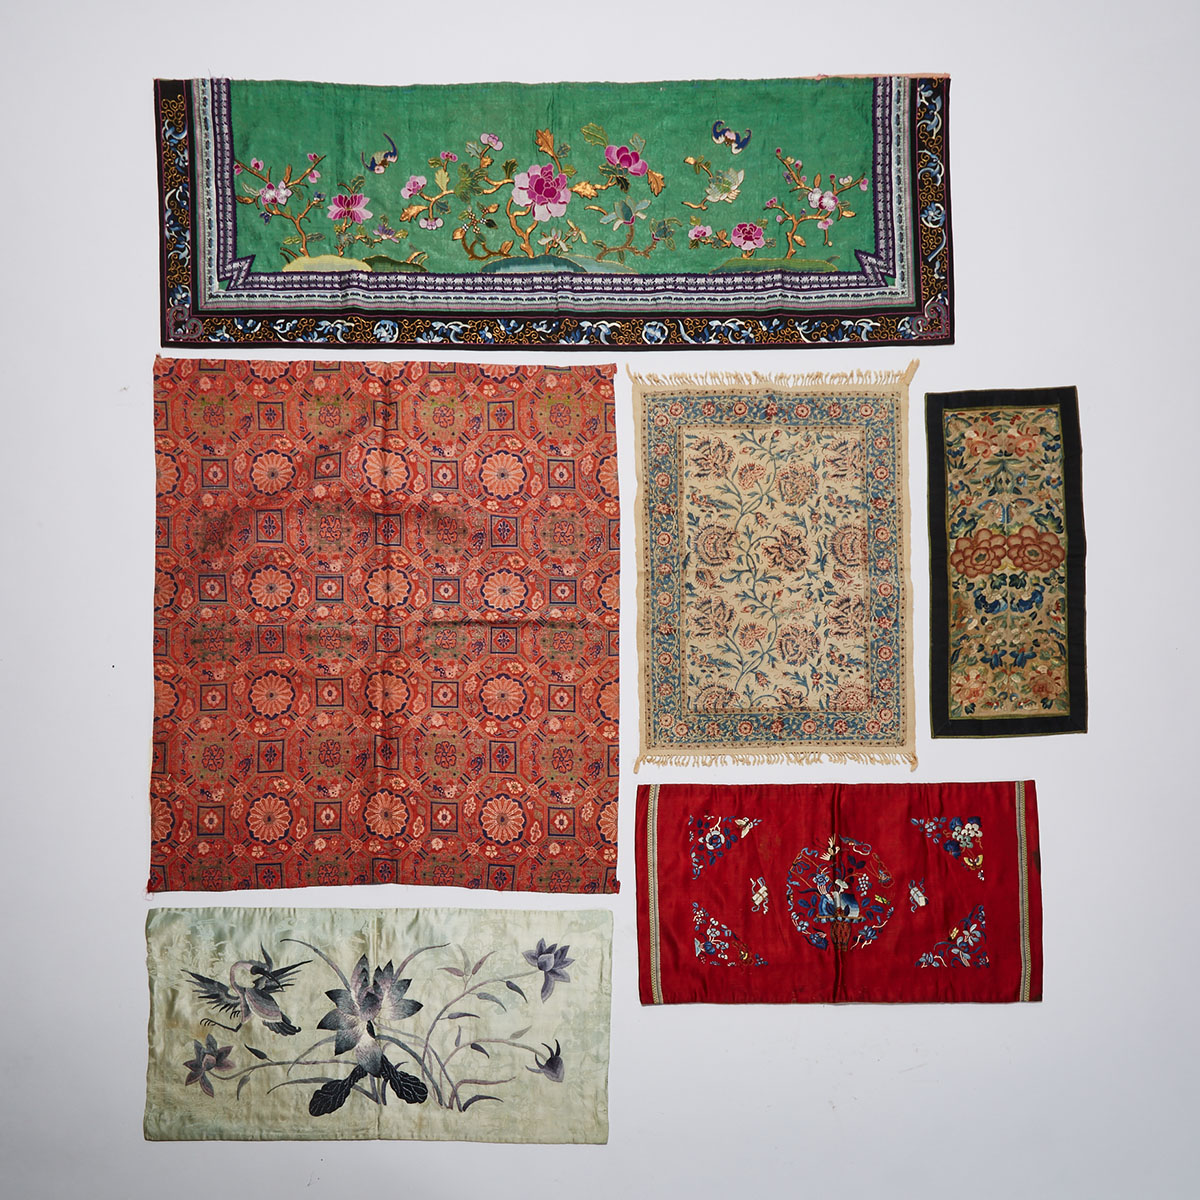 A Group of Six Chinese and Middle Eastern Textiles, 19th Century and Later